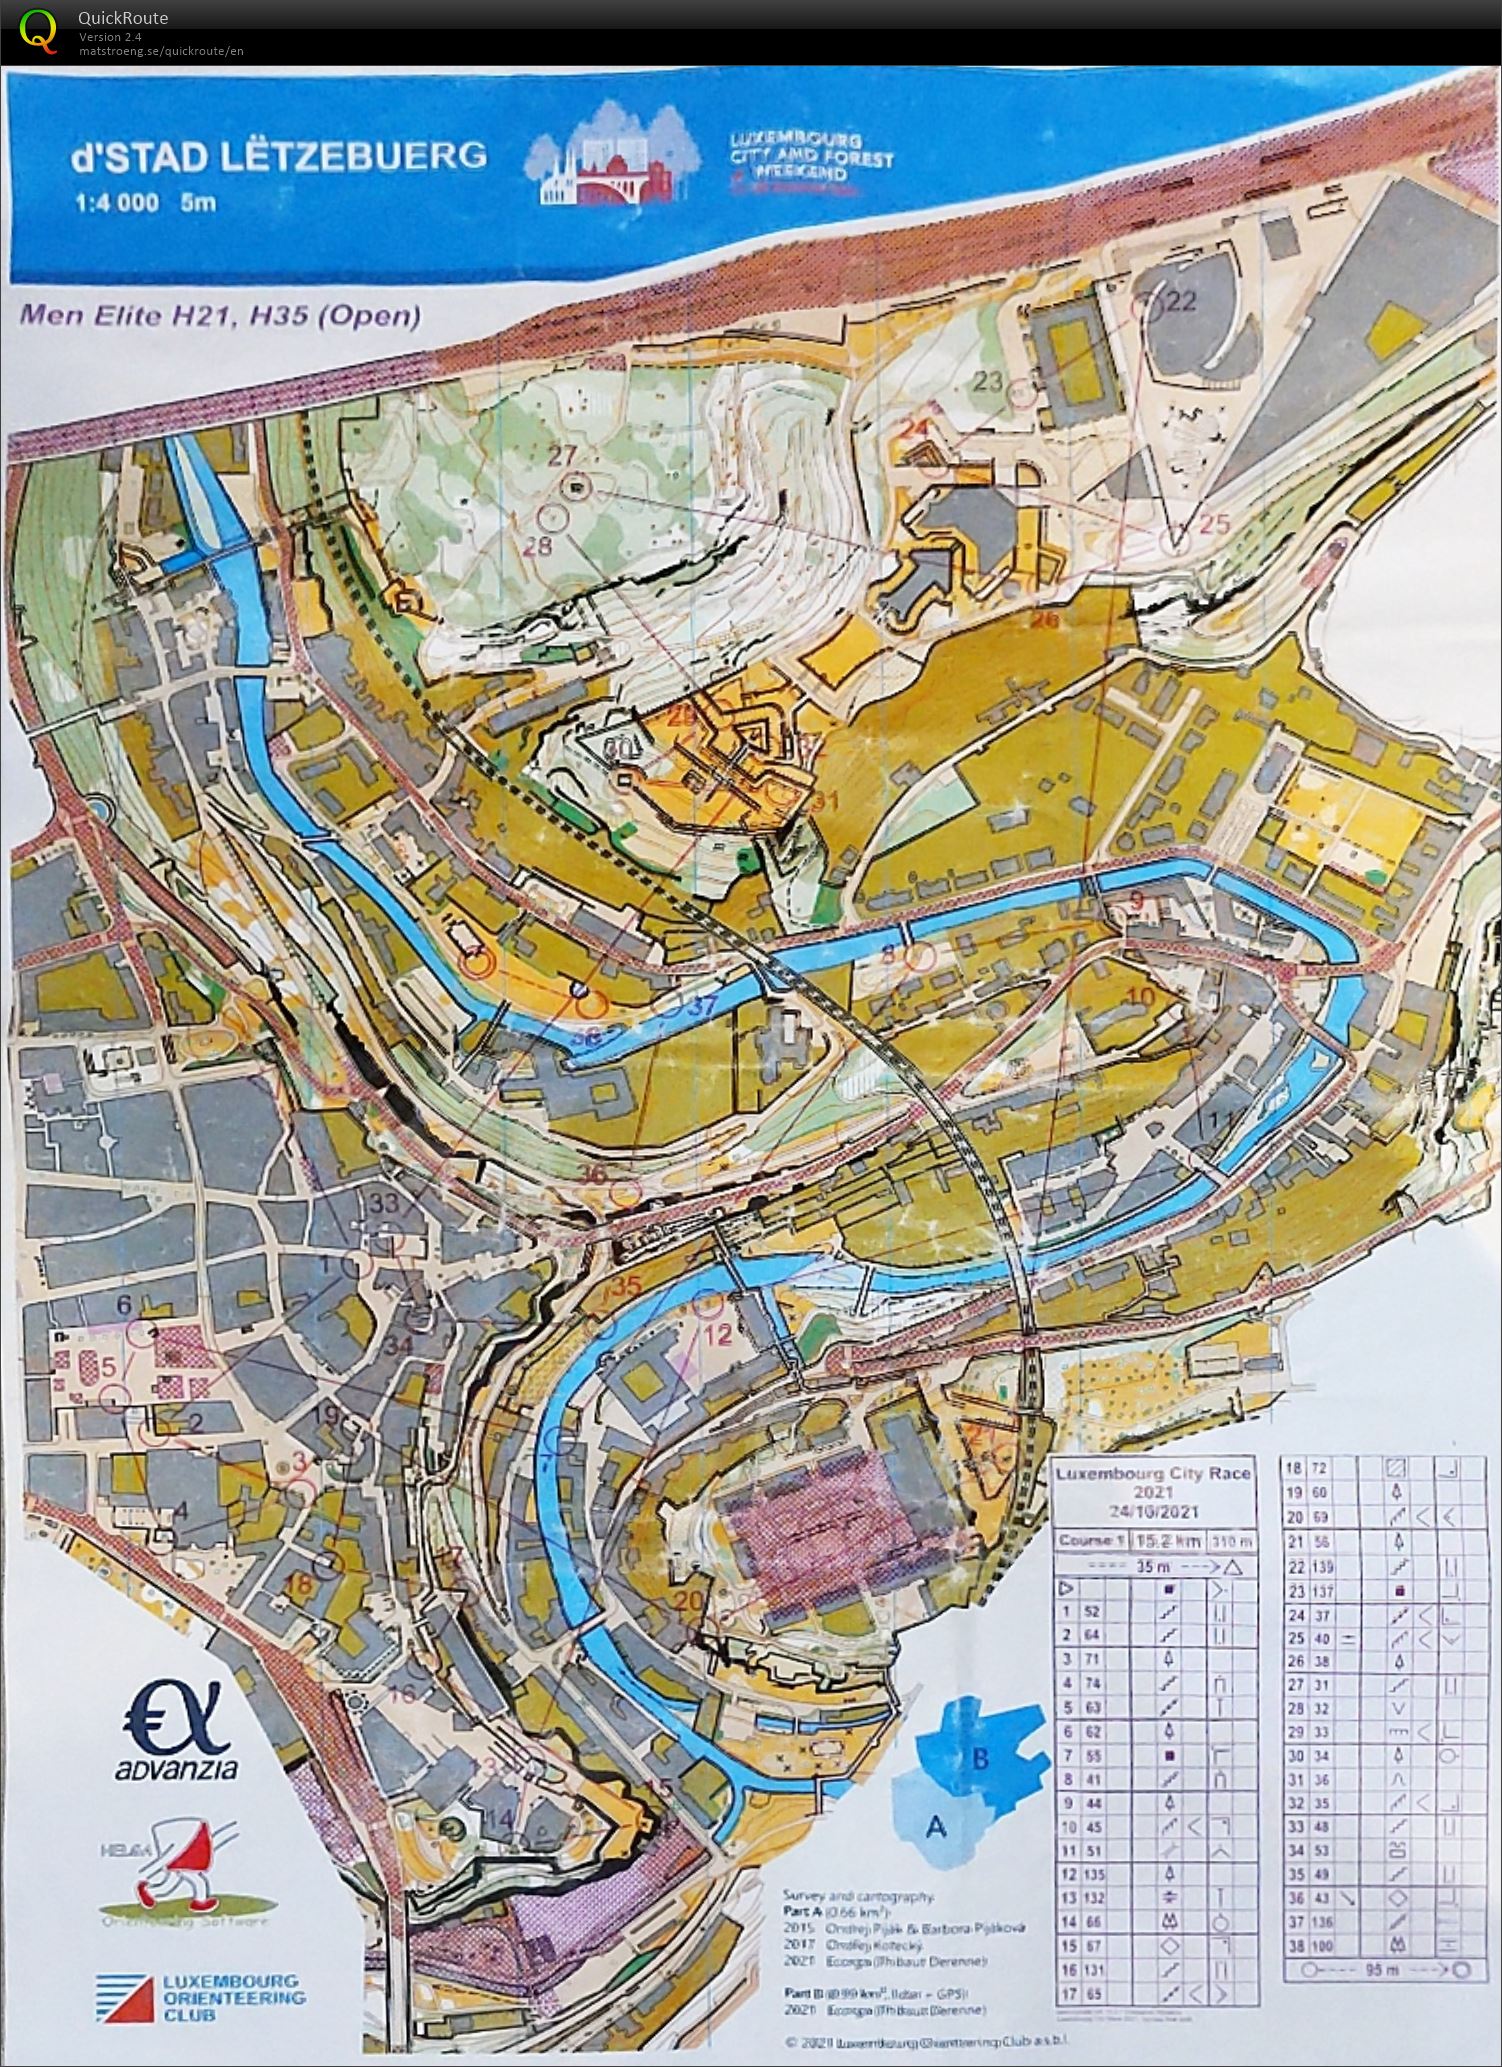 Luxembourg City Race (2021-10-24)